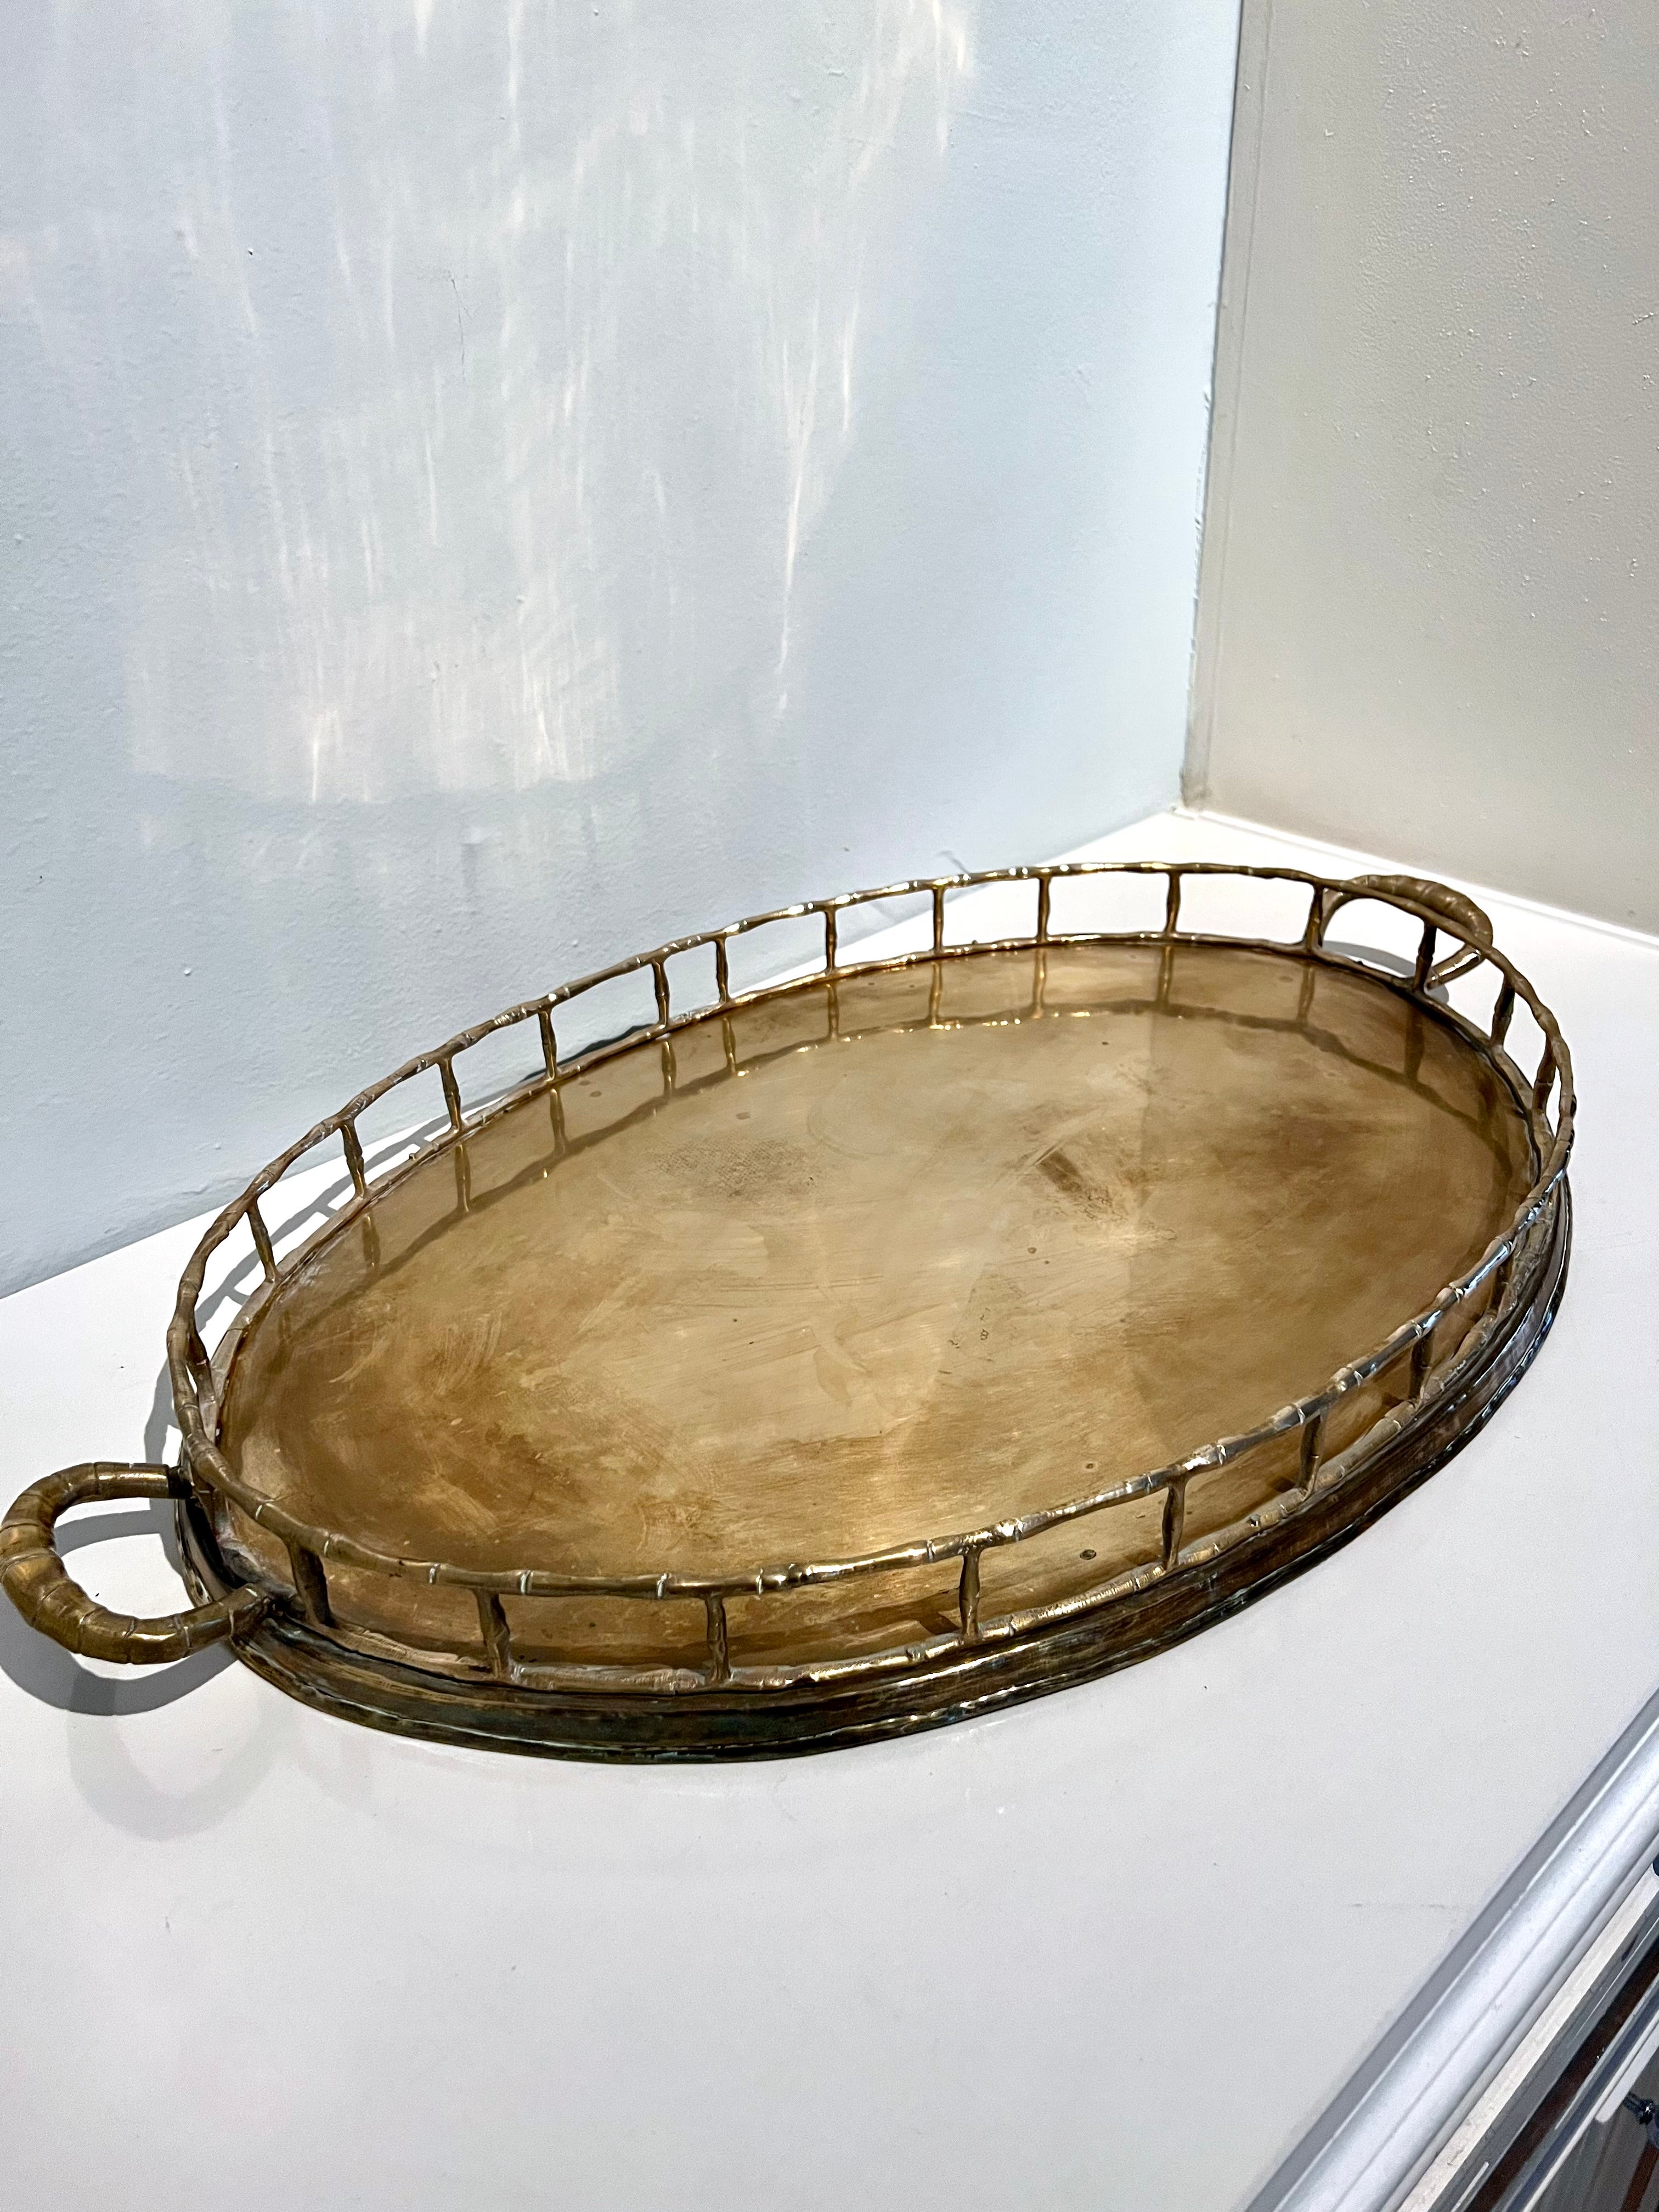 A large vintage Hollywood regency style brass bamboo serving tray. Great for display on coffee tables or serving cocktails. Polished and patinated. 

Our storefront is home to several brass bamboo tray options. Please visit to find the one that